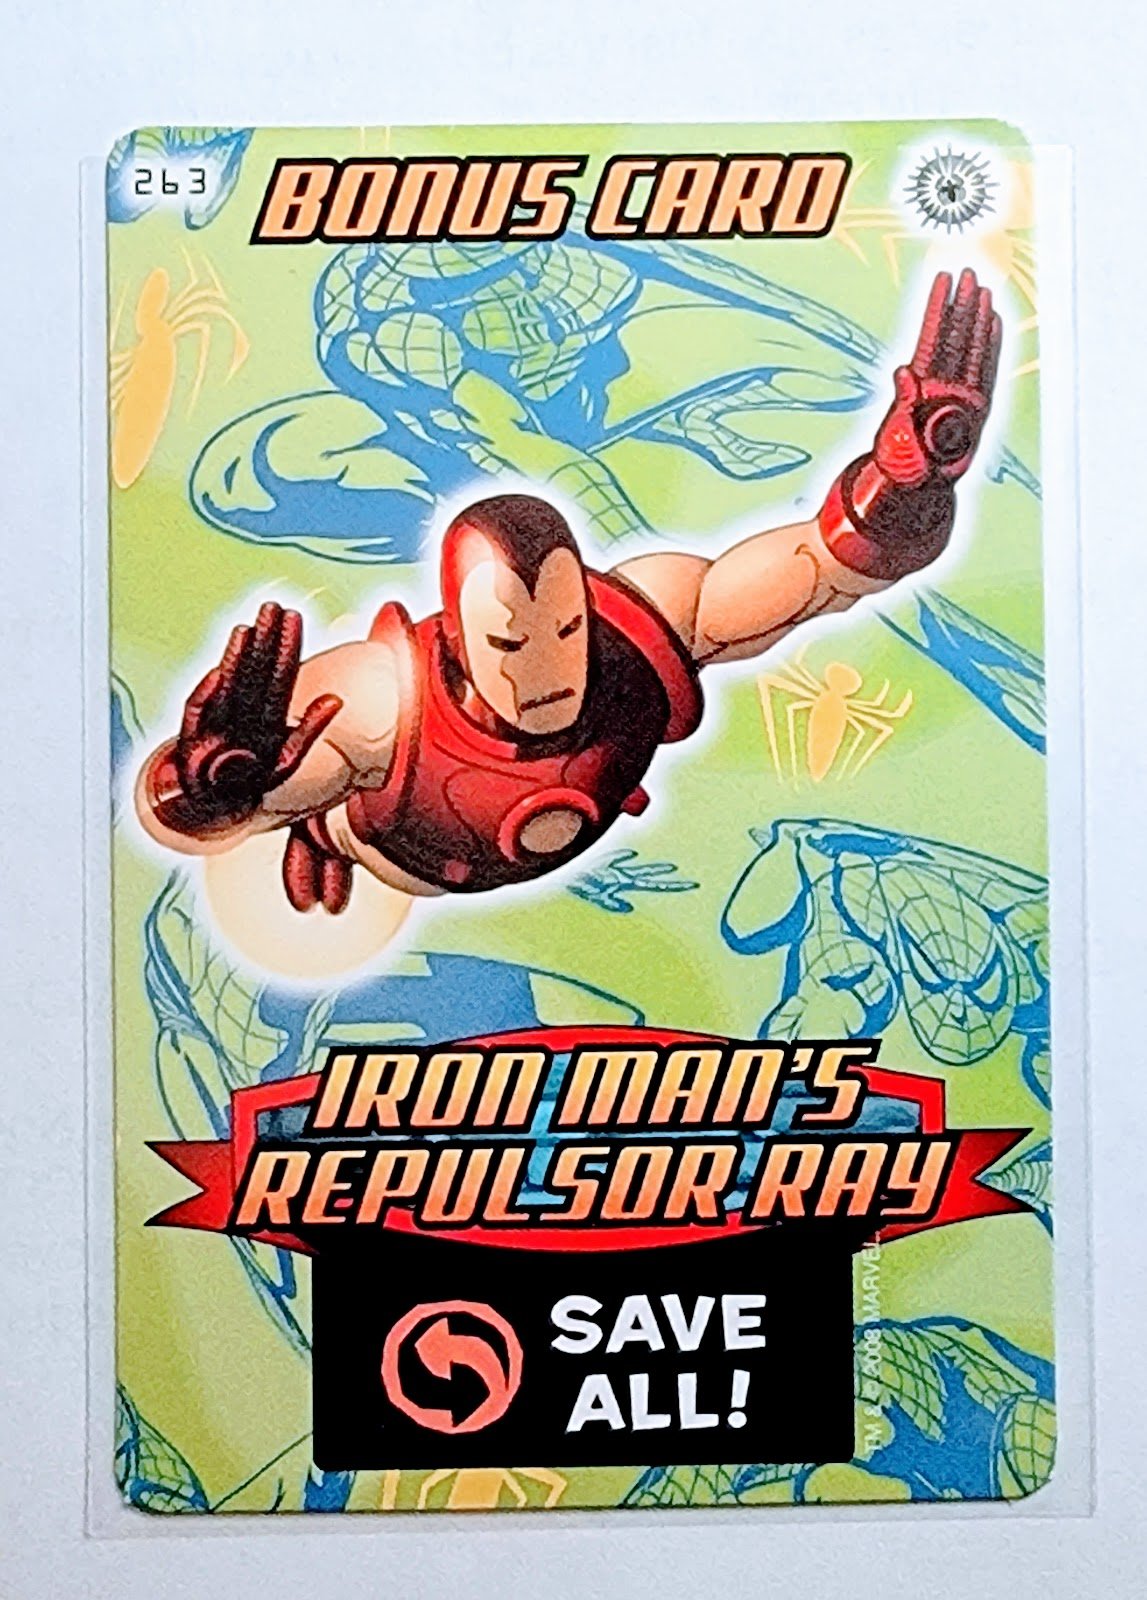 2008 Spiderman Heroes and Villains Iron Man's Repulsor Ray Bonus Card #263 Marvel Booster Trading Card UPTI simple Xclusive Collectibles   